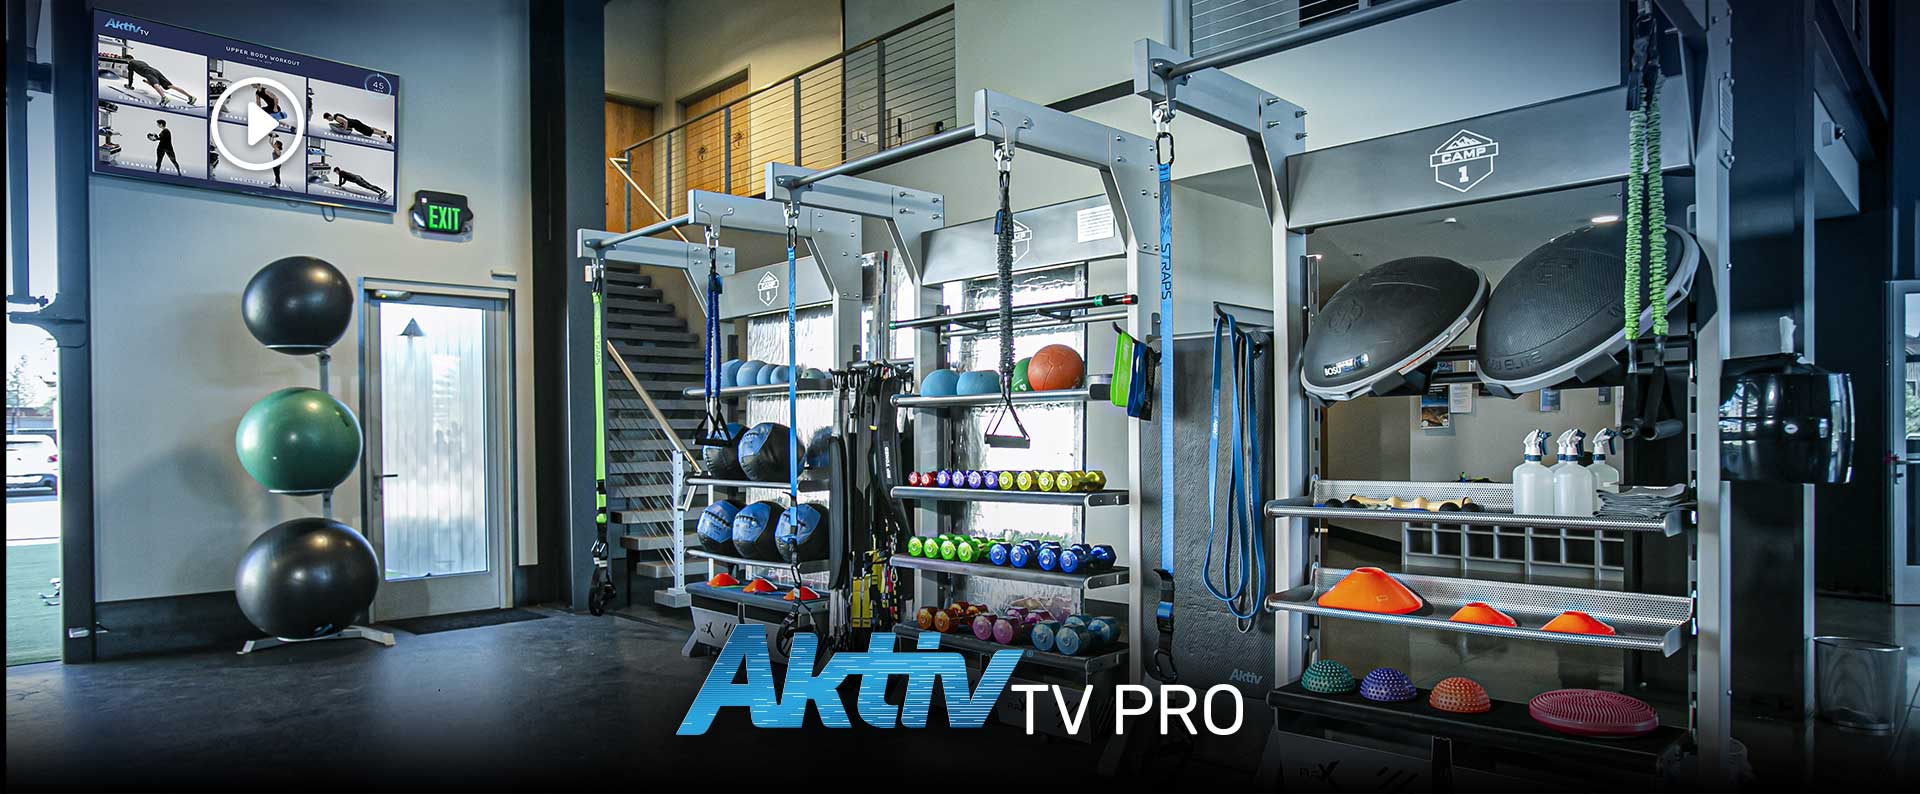 AktivTV Pro digital exercise guidance in a health club.